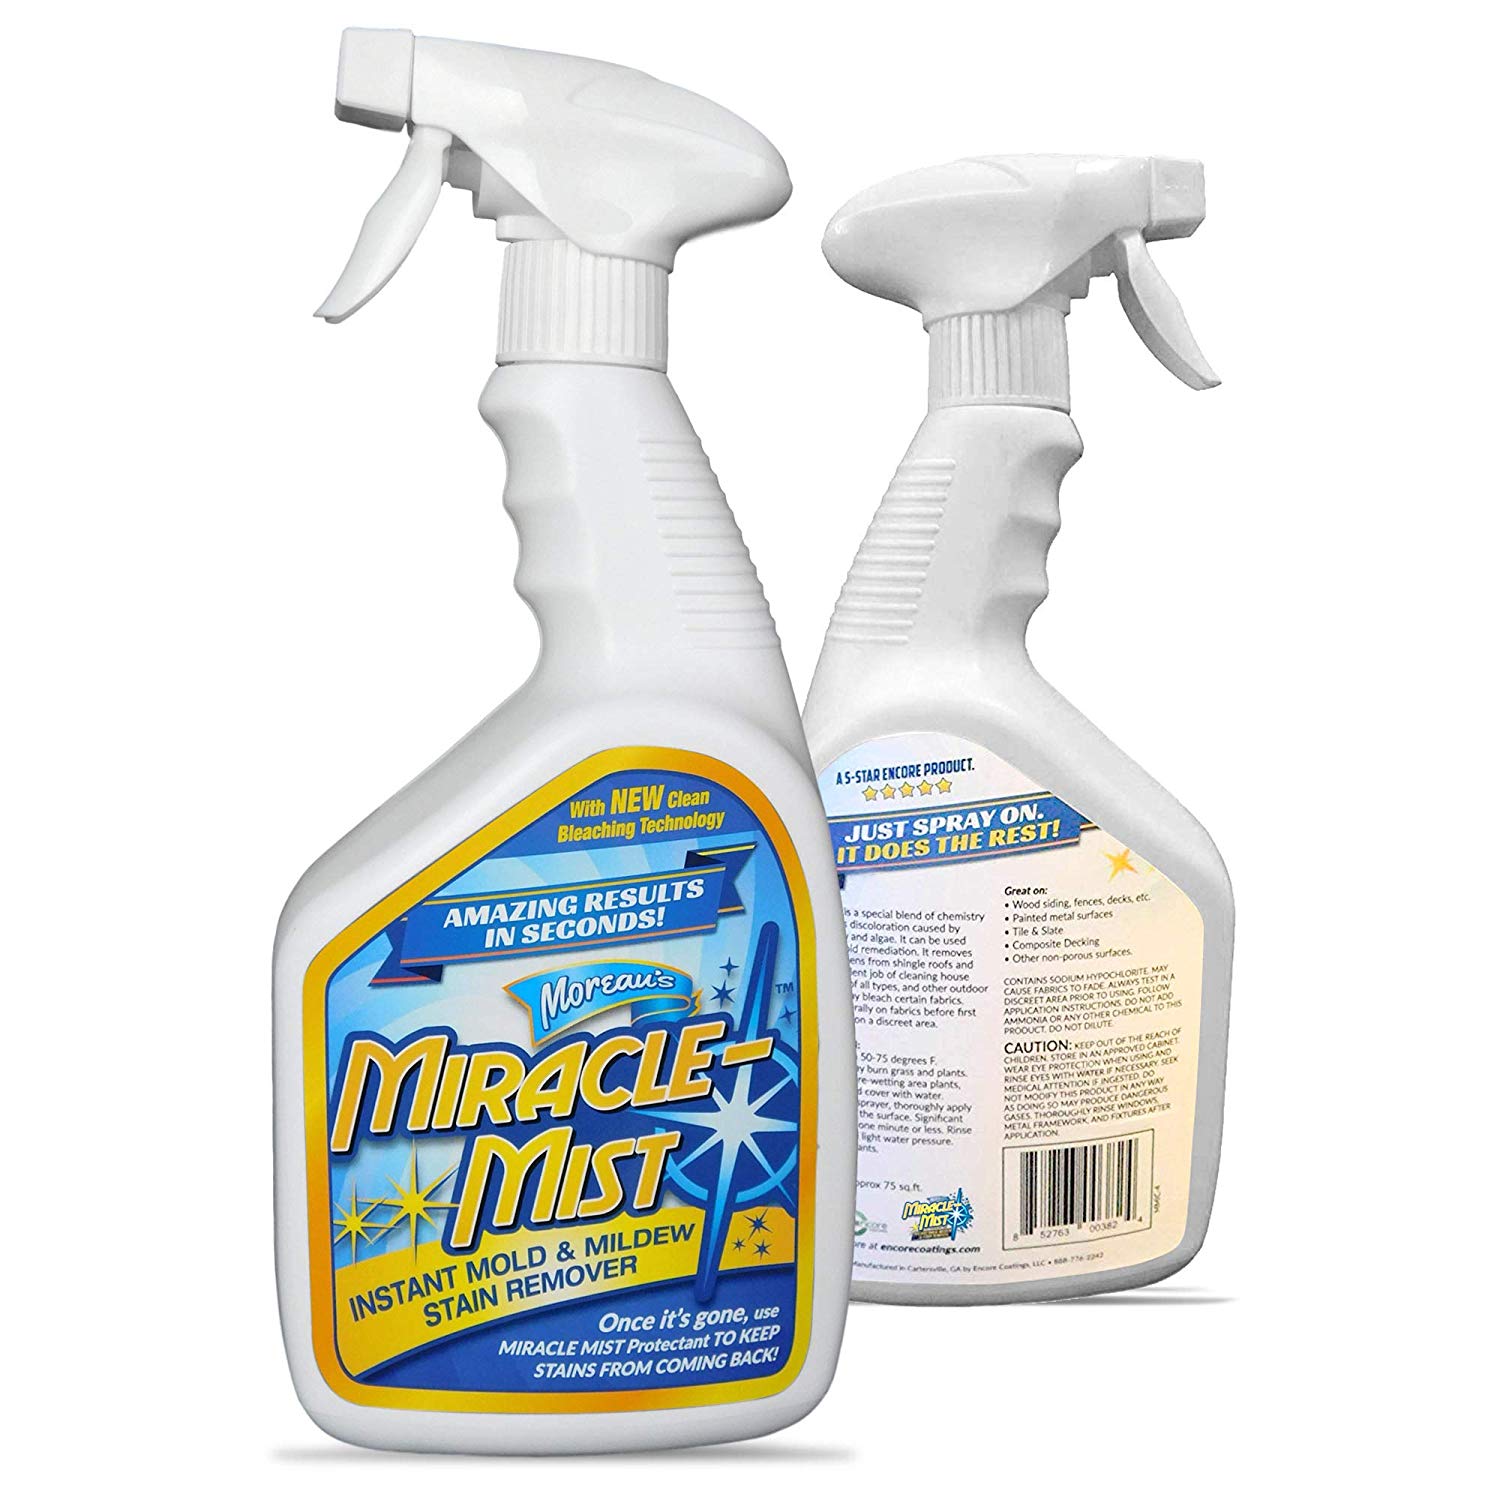 MiracleMist Instant Mold and Mildew Stain Remover for Indoor and Outdoor Use - Long Lasting Bathroom, Deck, Concrete, Vinyl, Tile Cleaner, 32 Oz